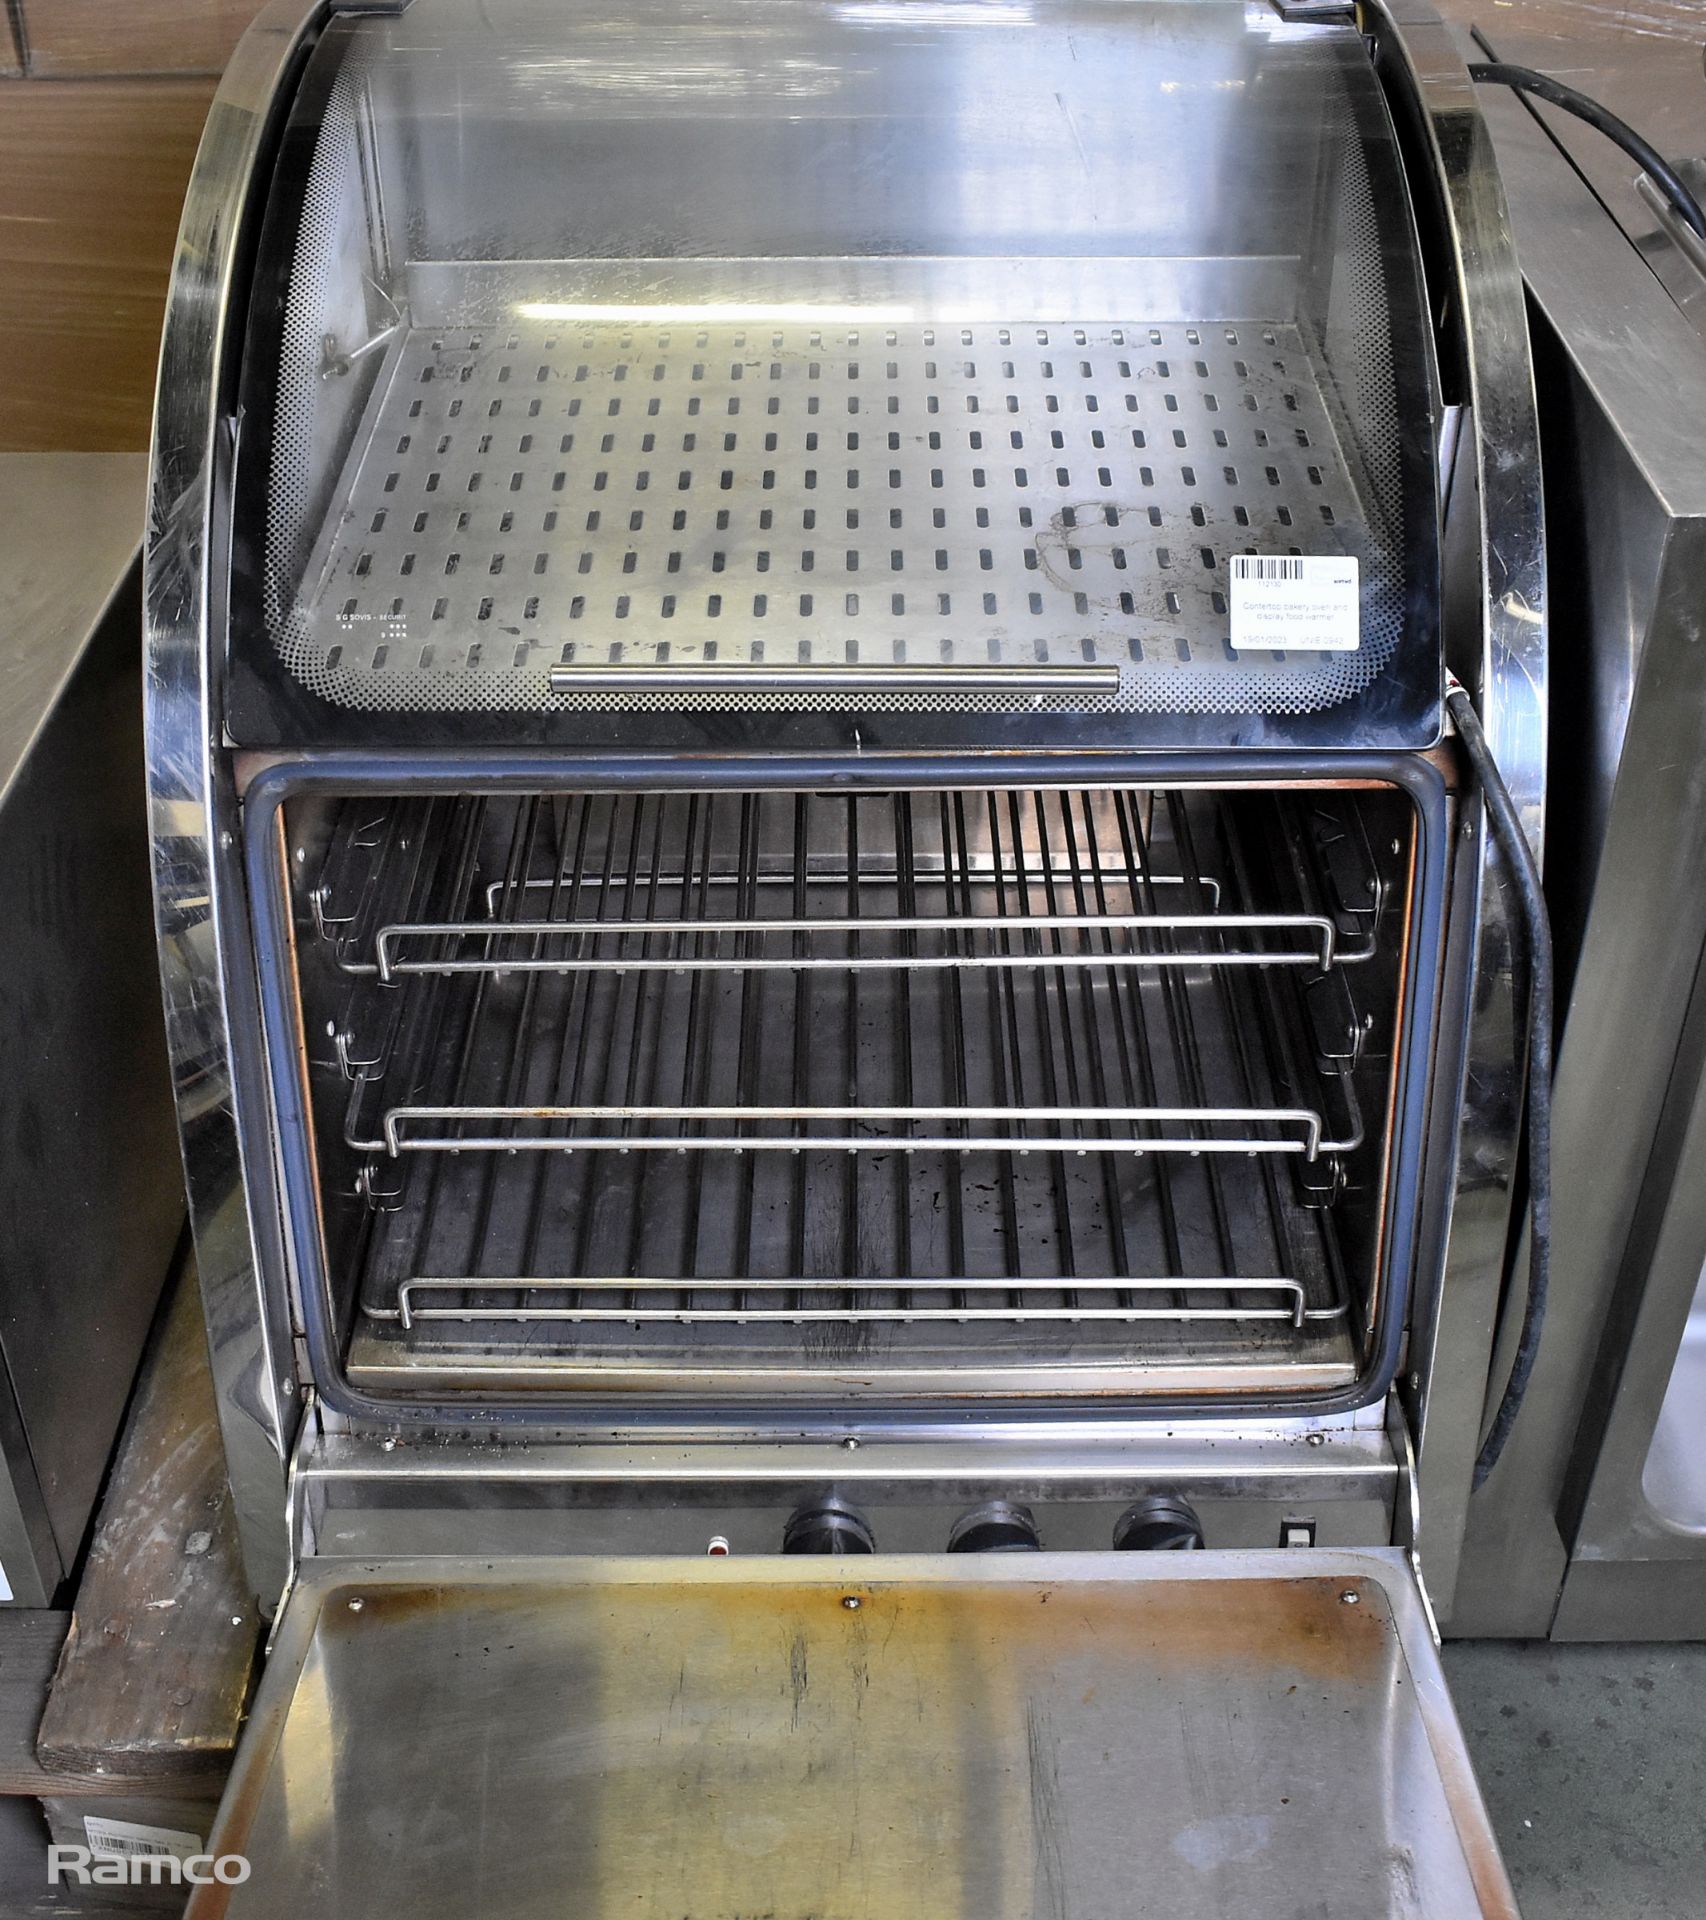 Countertop bakery oven and display food warmer - Image 3 of 5